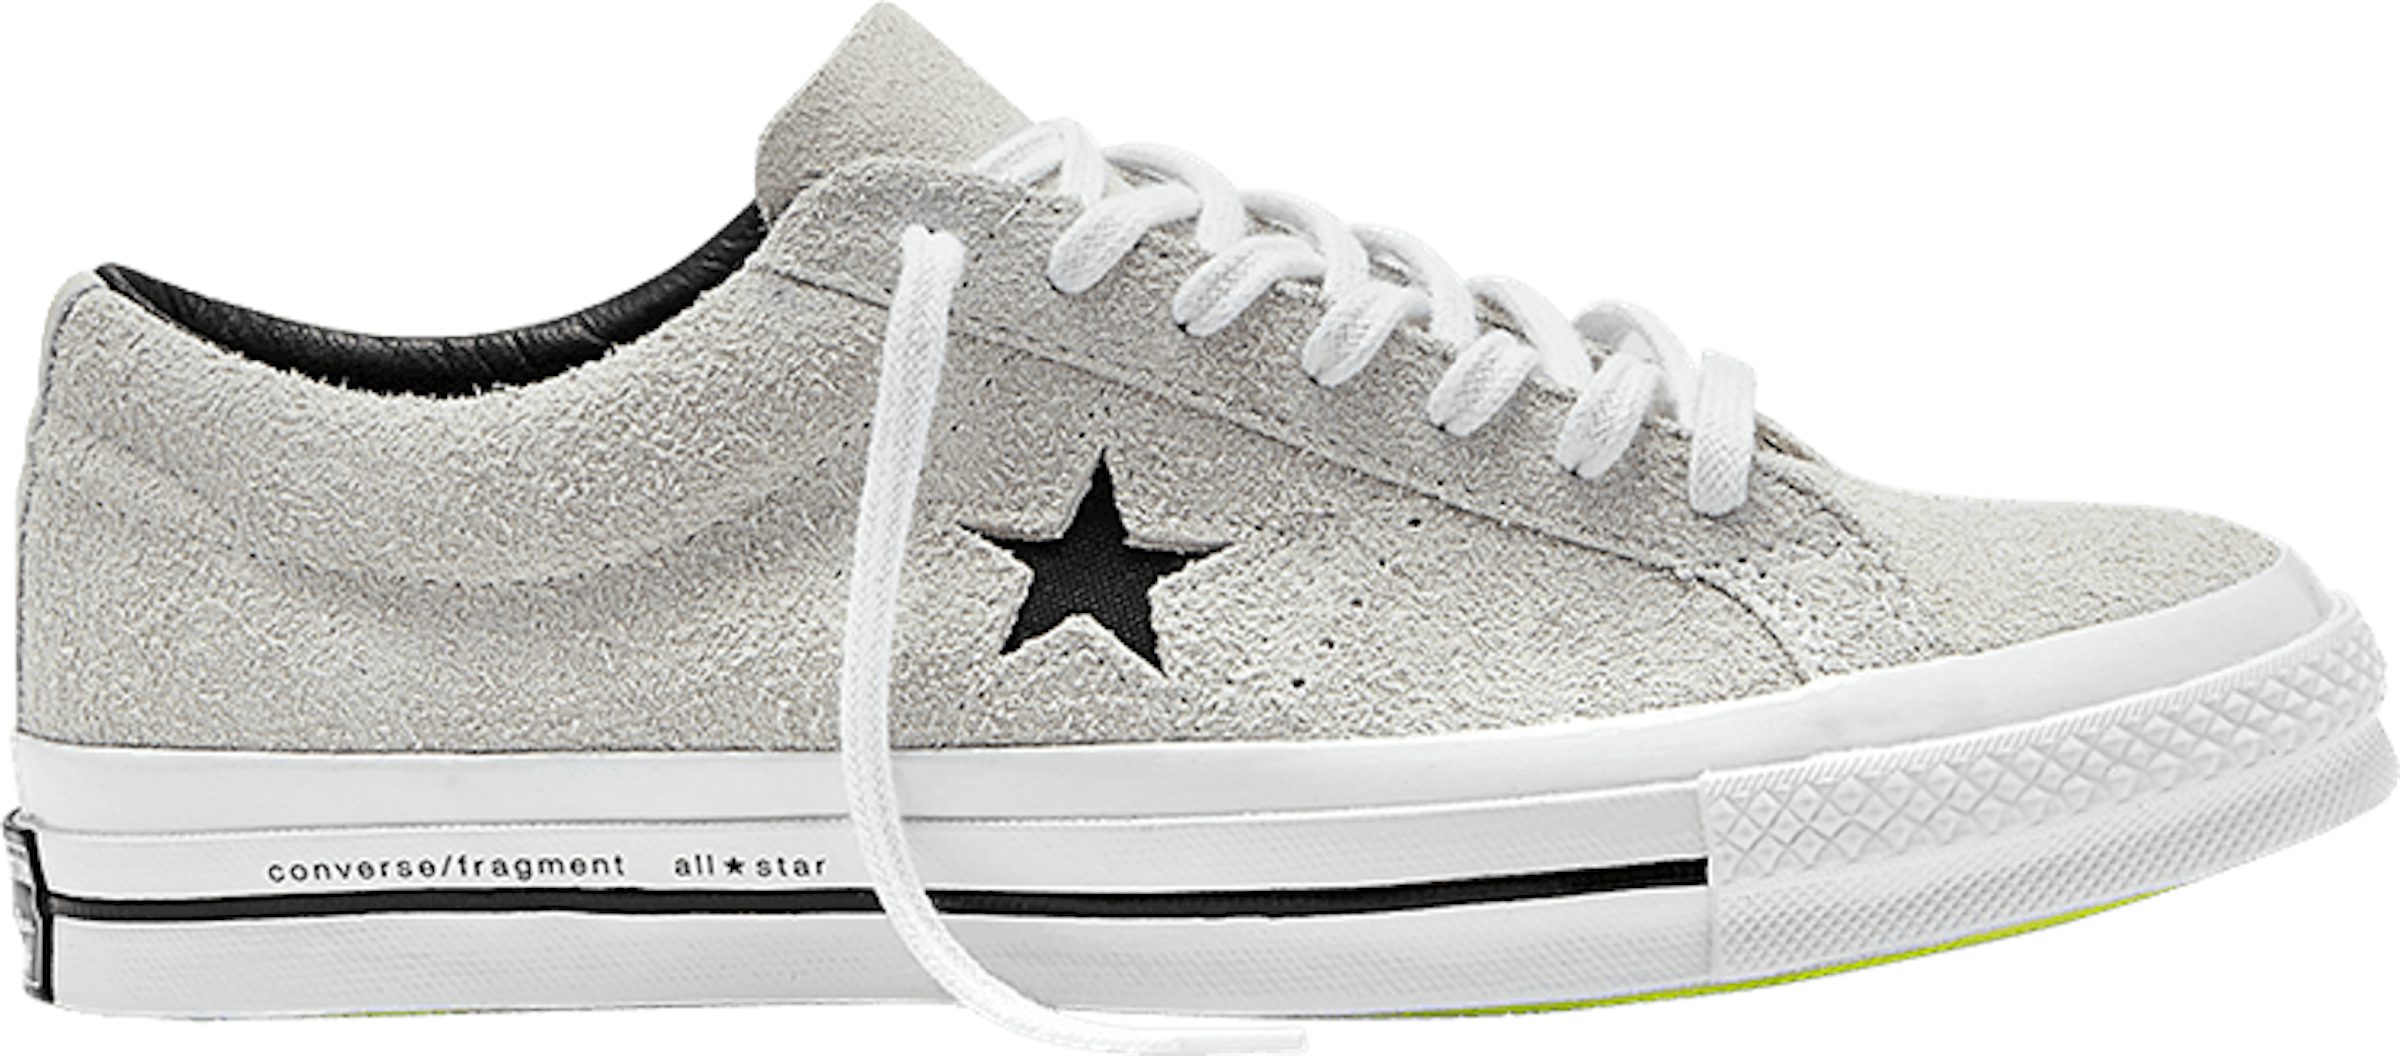 Buy Converse One Star Shoes & New Sneakers -